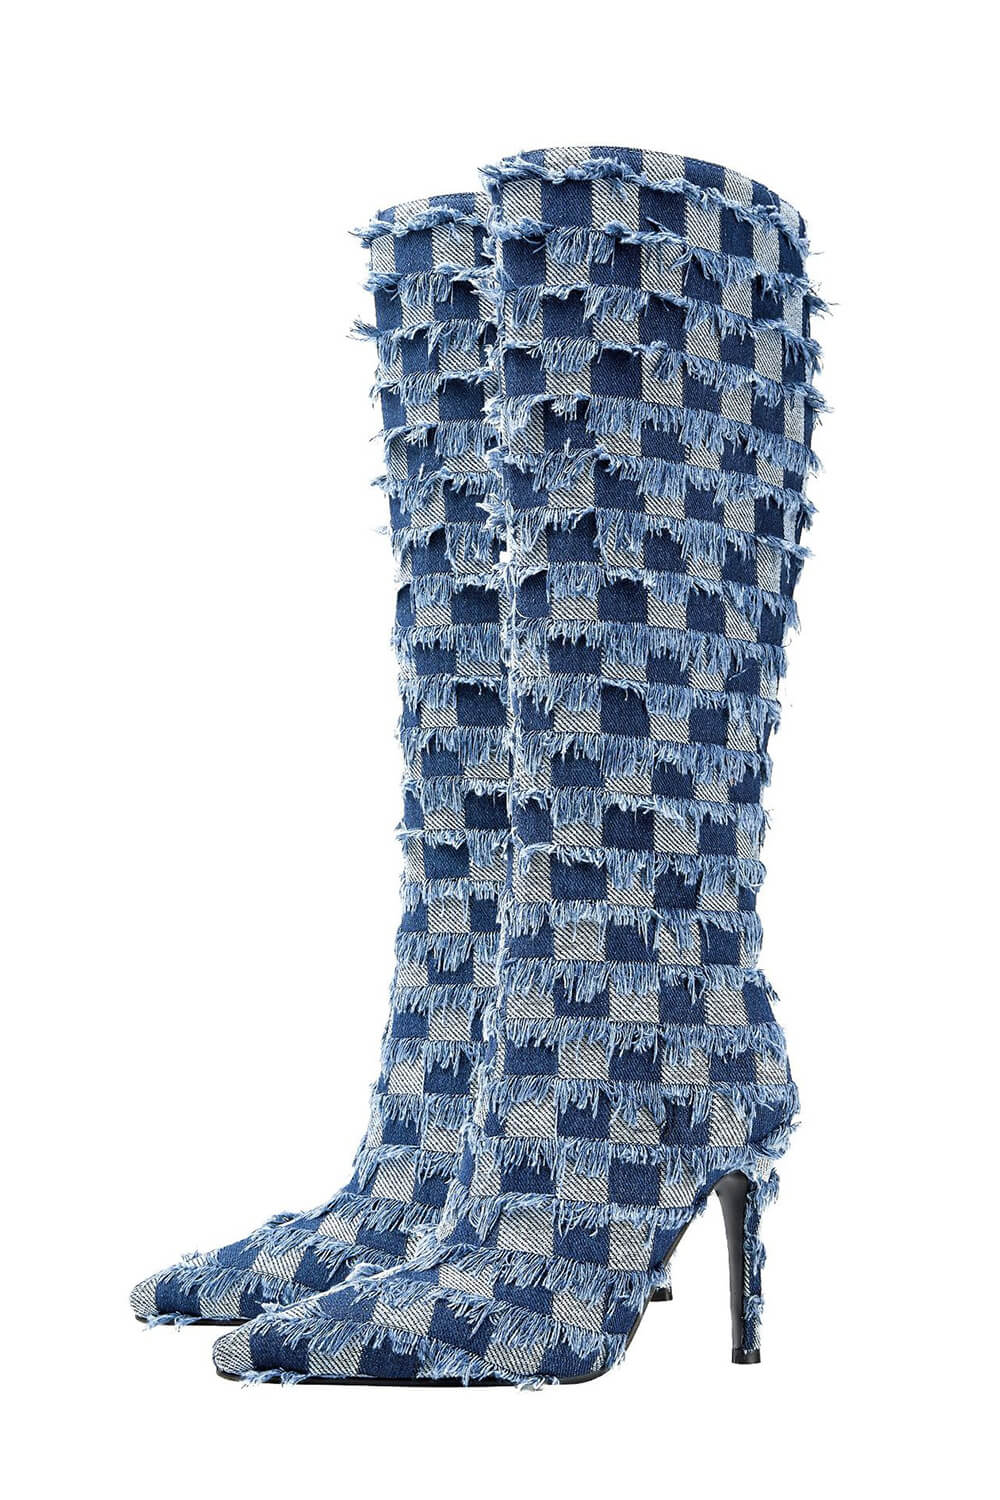 Distressed Checkered Denim Pointed Toe Knee High Stiletto Boots